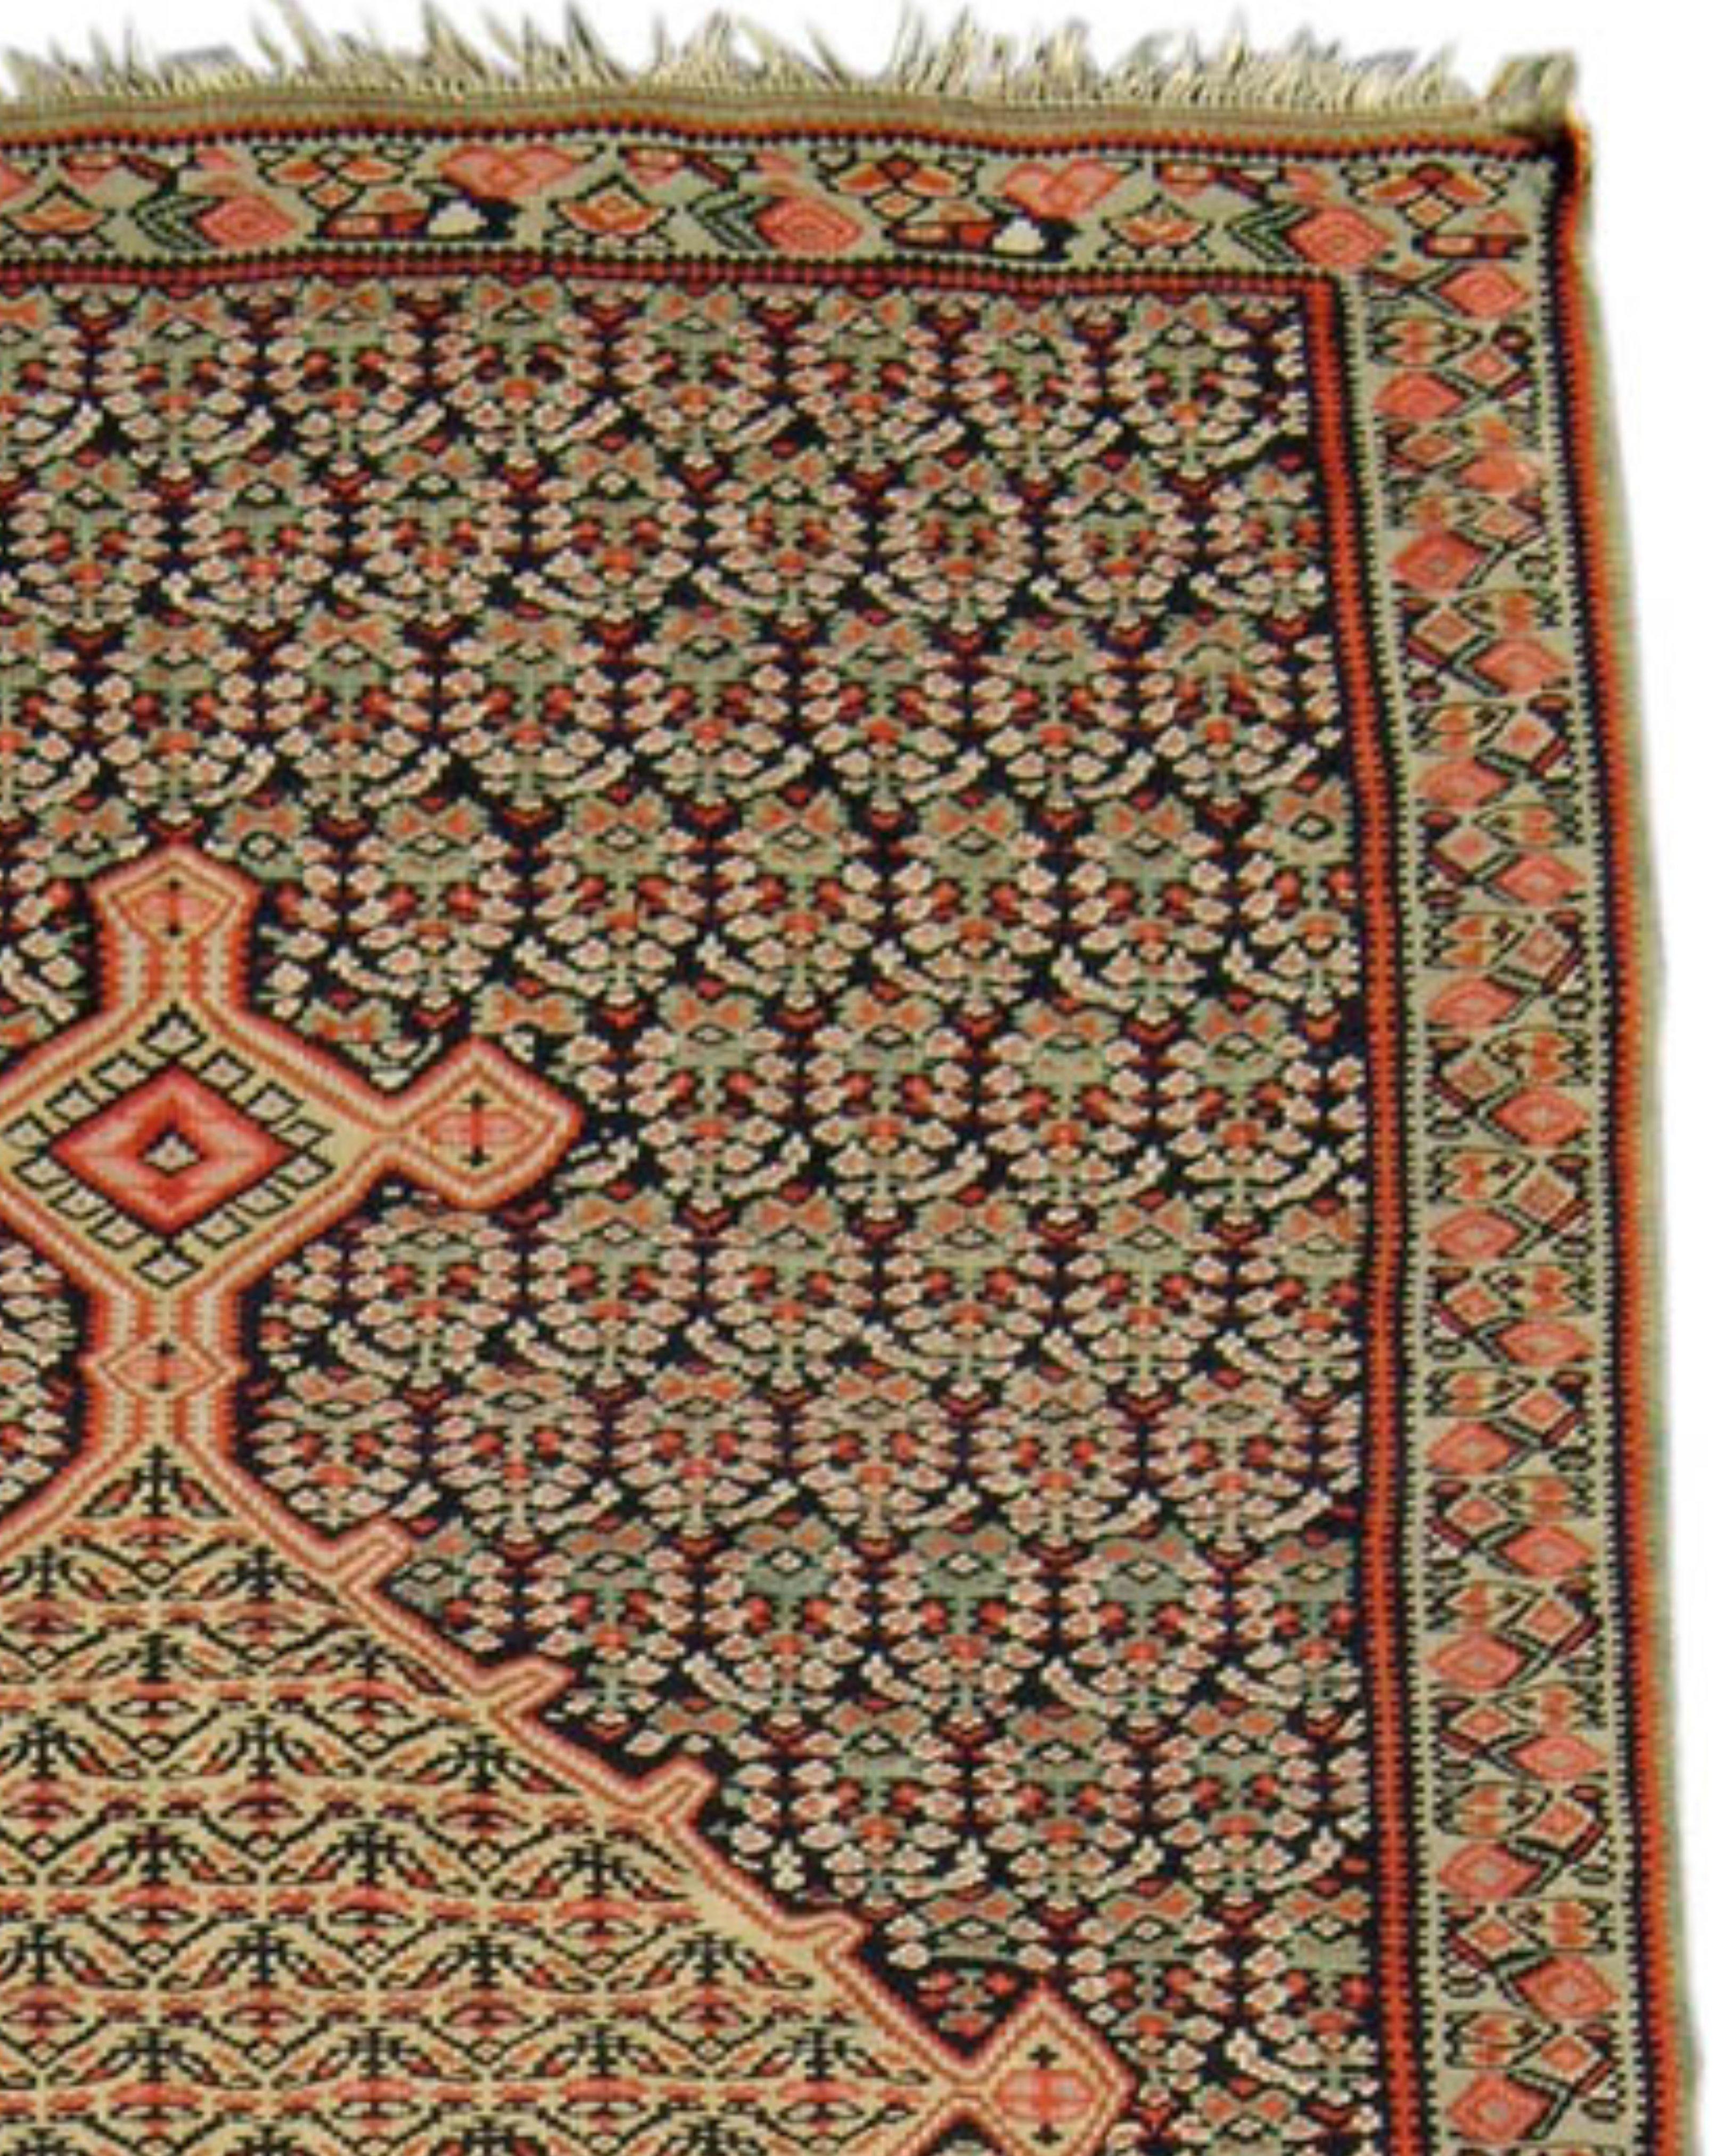 Antique Persian Senneh Kilim Rug, 19th Century

A central medallion in the classic Persian style floats against a ground of delicately stylized paisleys or “boteh” in this elegant Senneh kilim from western Persia. A further floral design gracefully